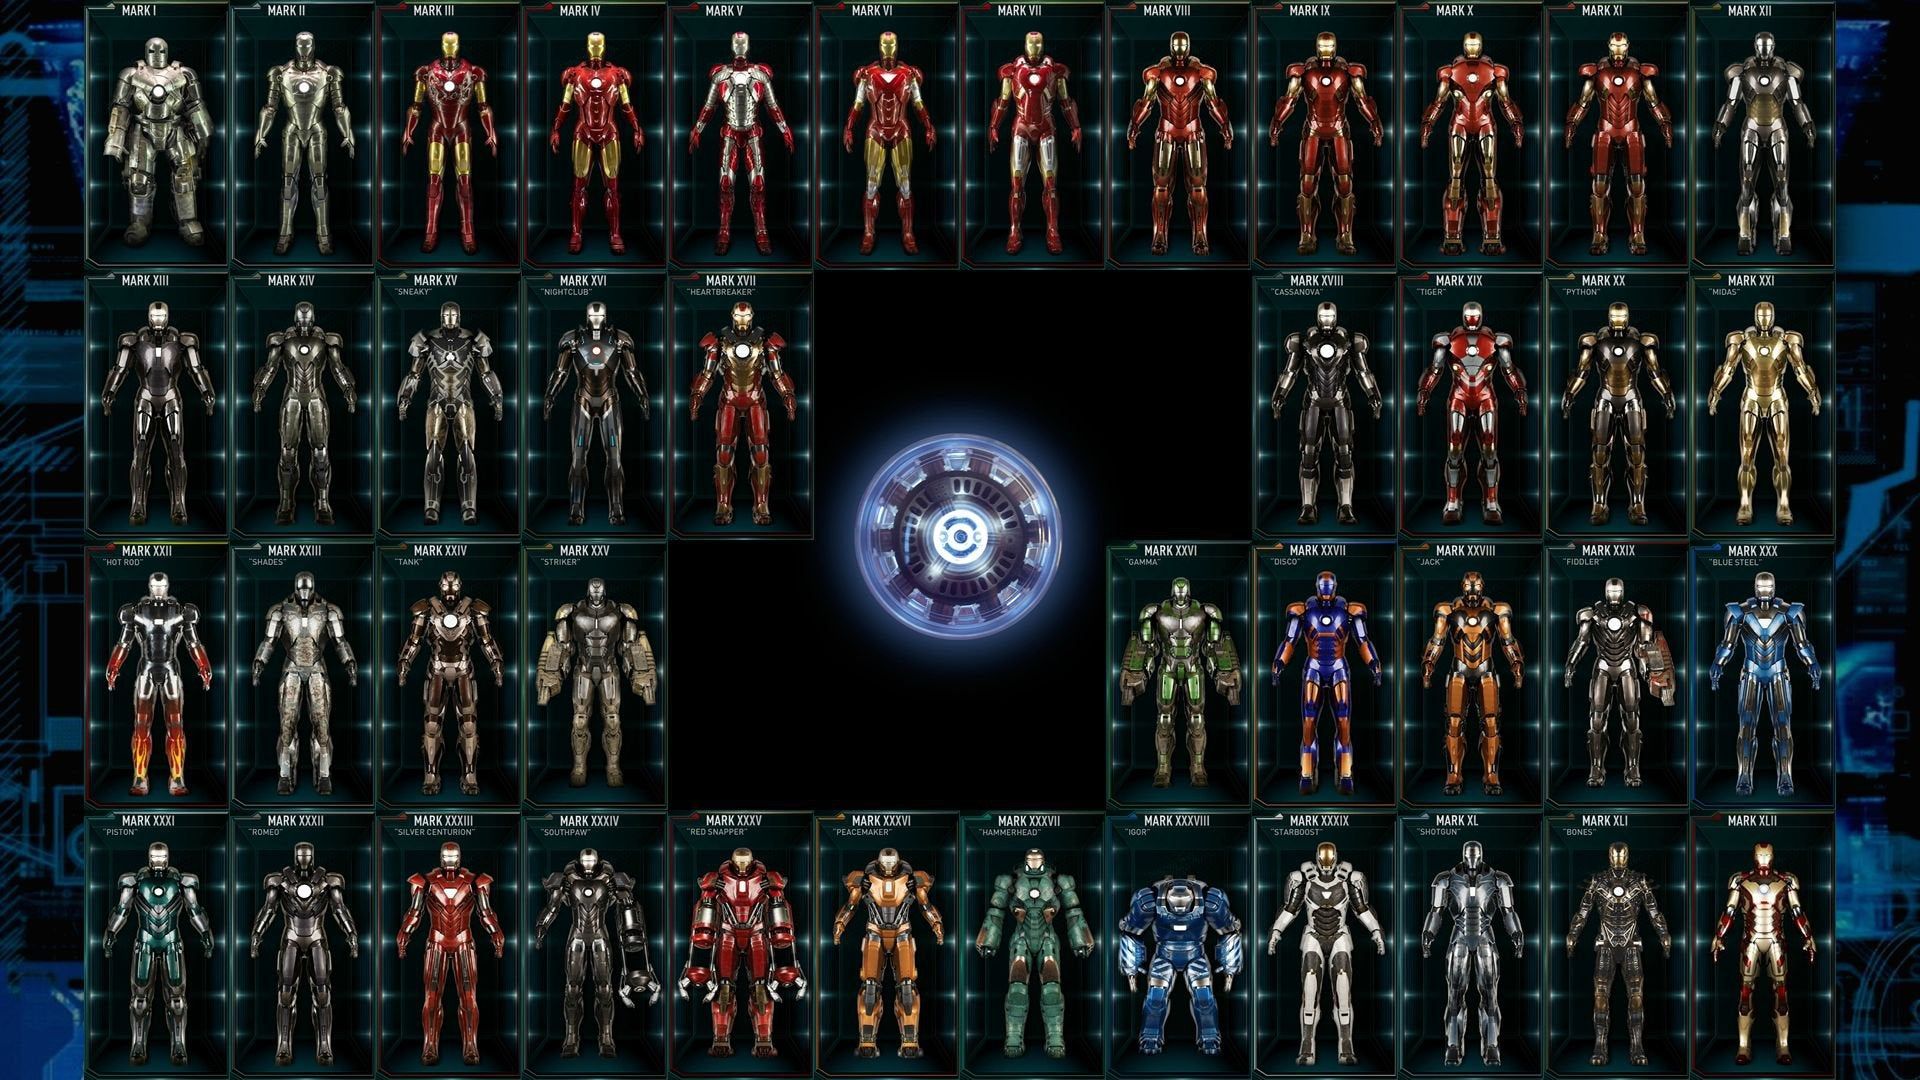 Made a wall paper out of the 42 current Iron Man suits